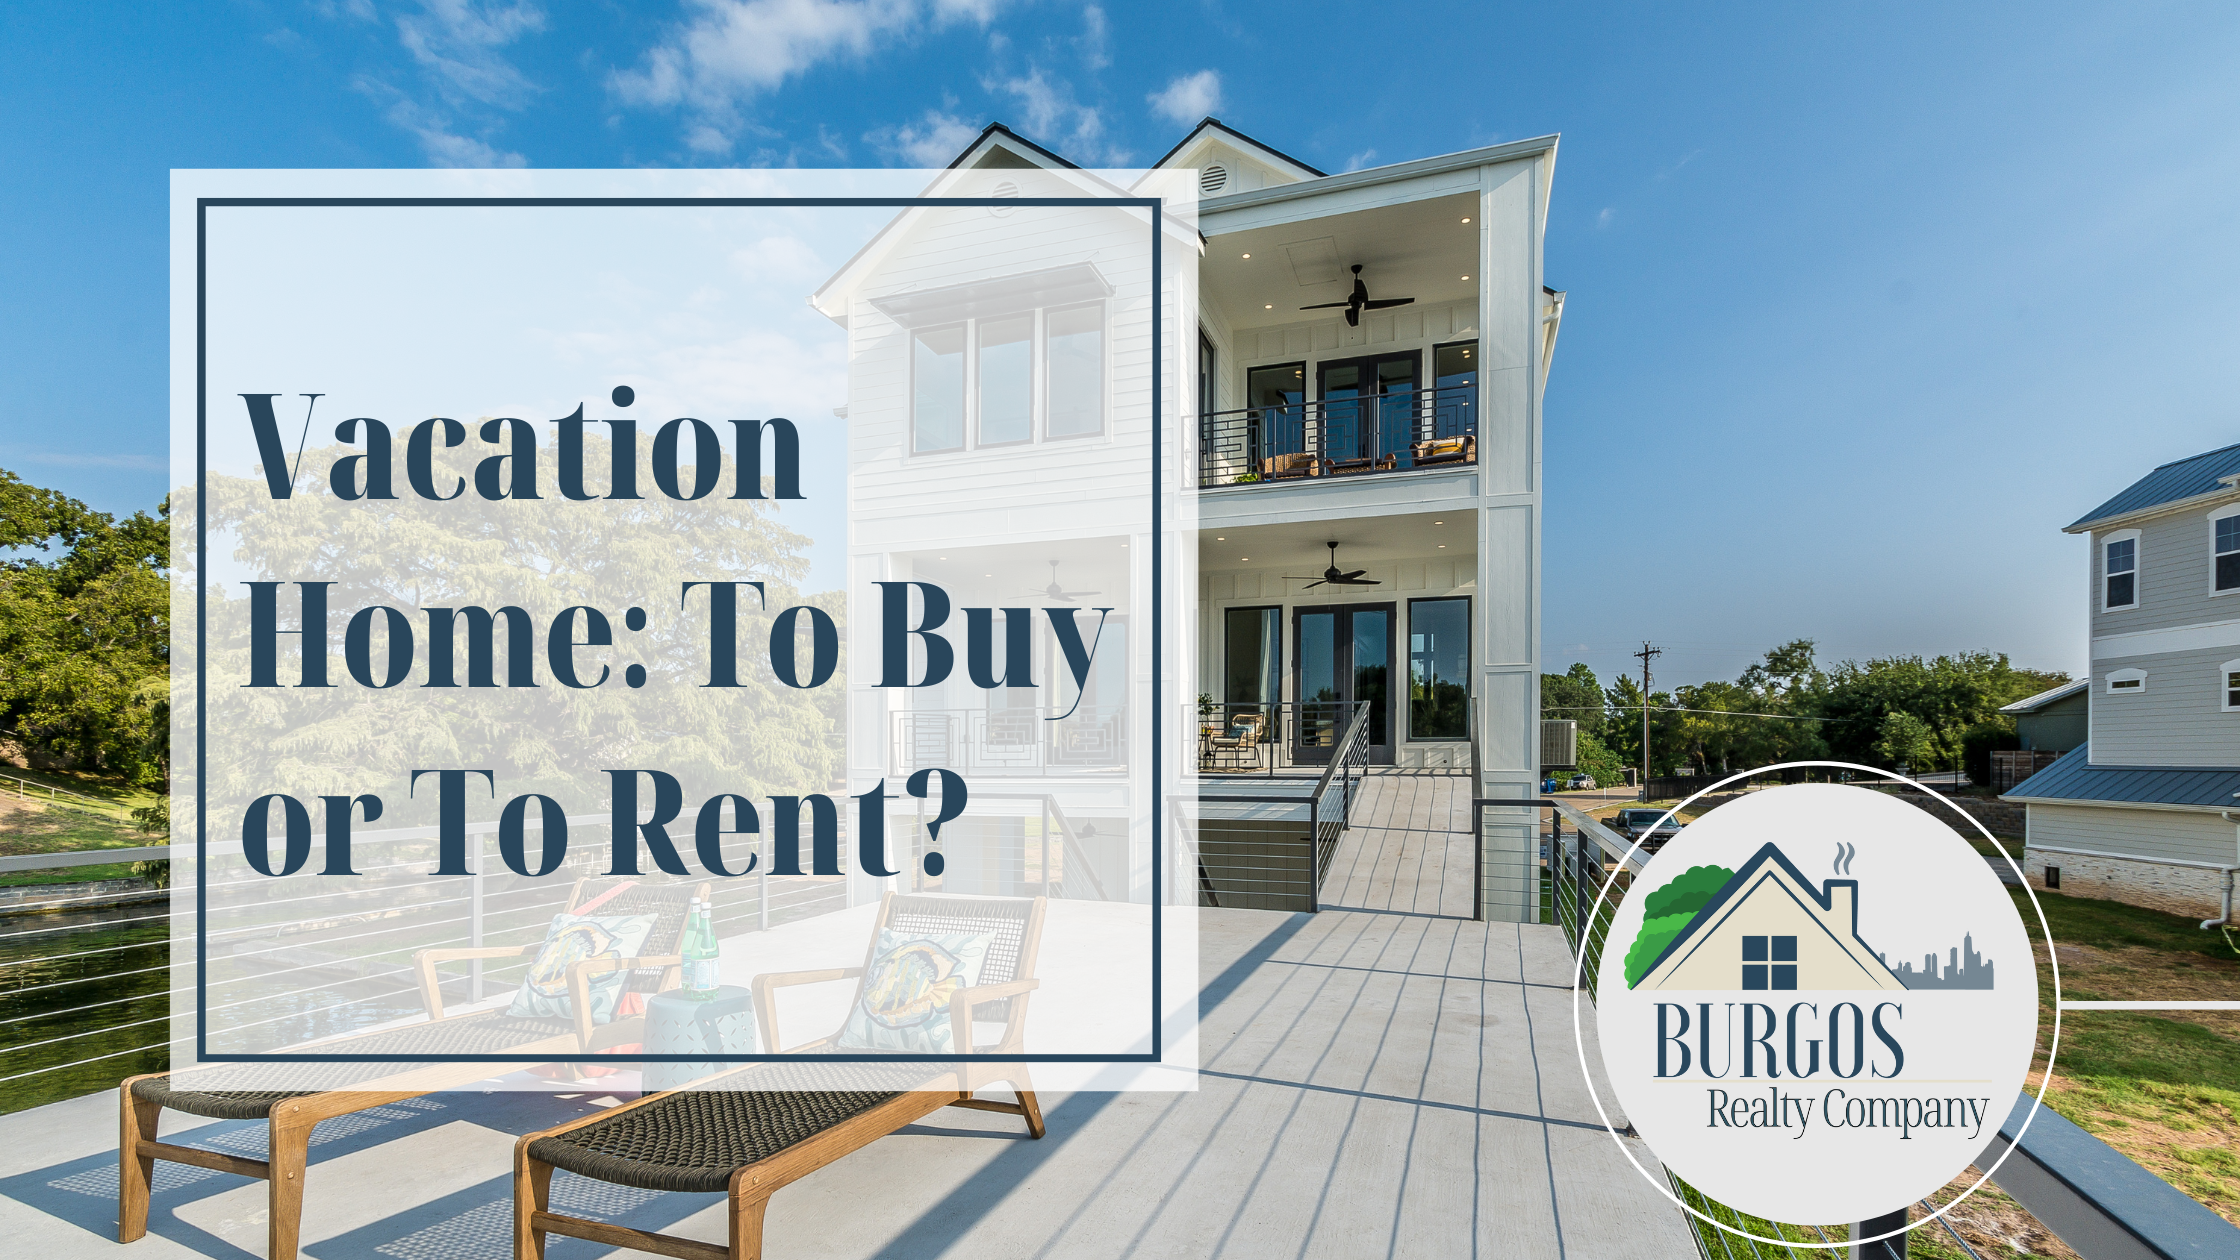 Blog about vacation home: to buy or to rent Join Our Team of real estate agents at Burgos Realty Company